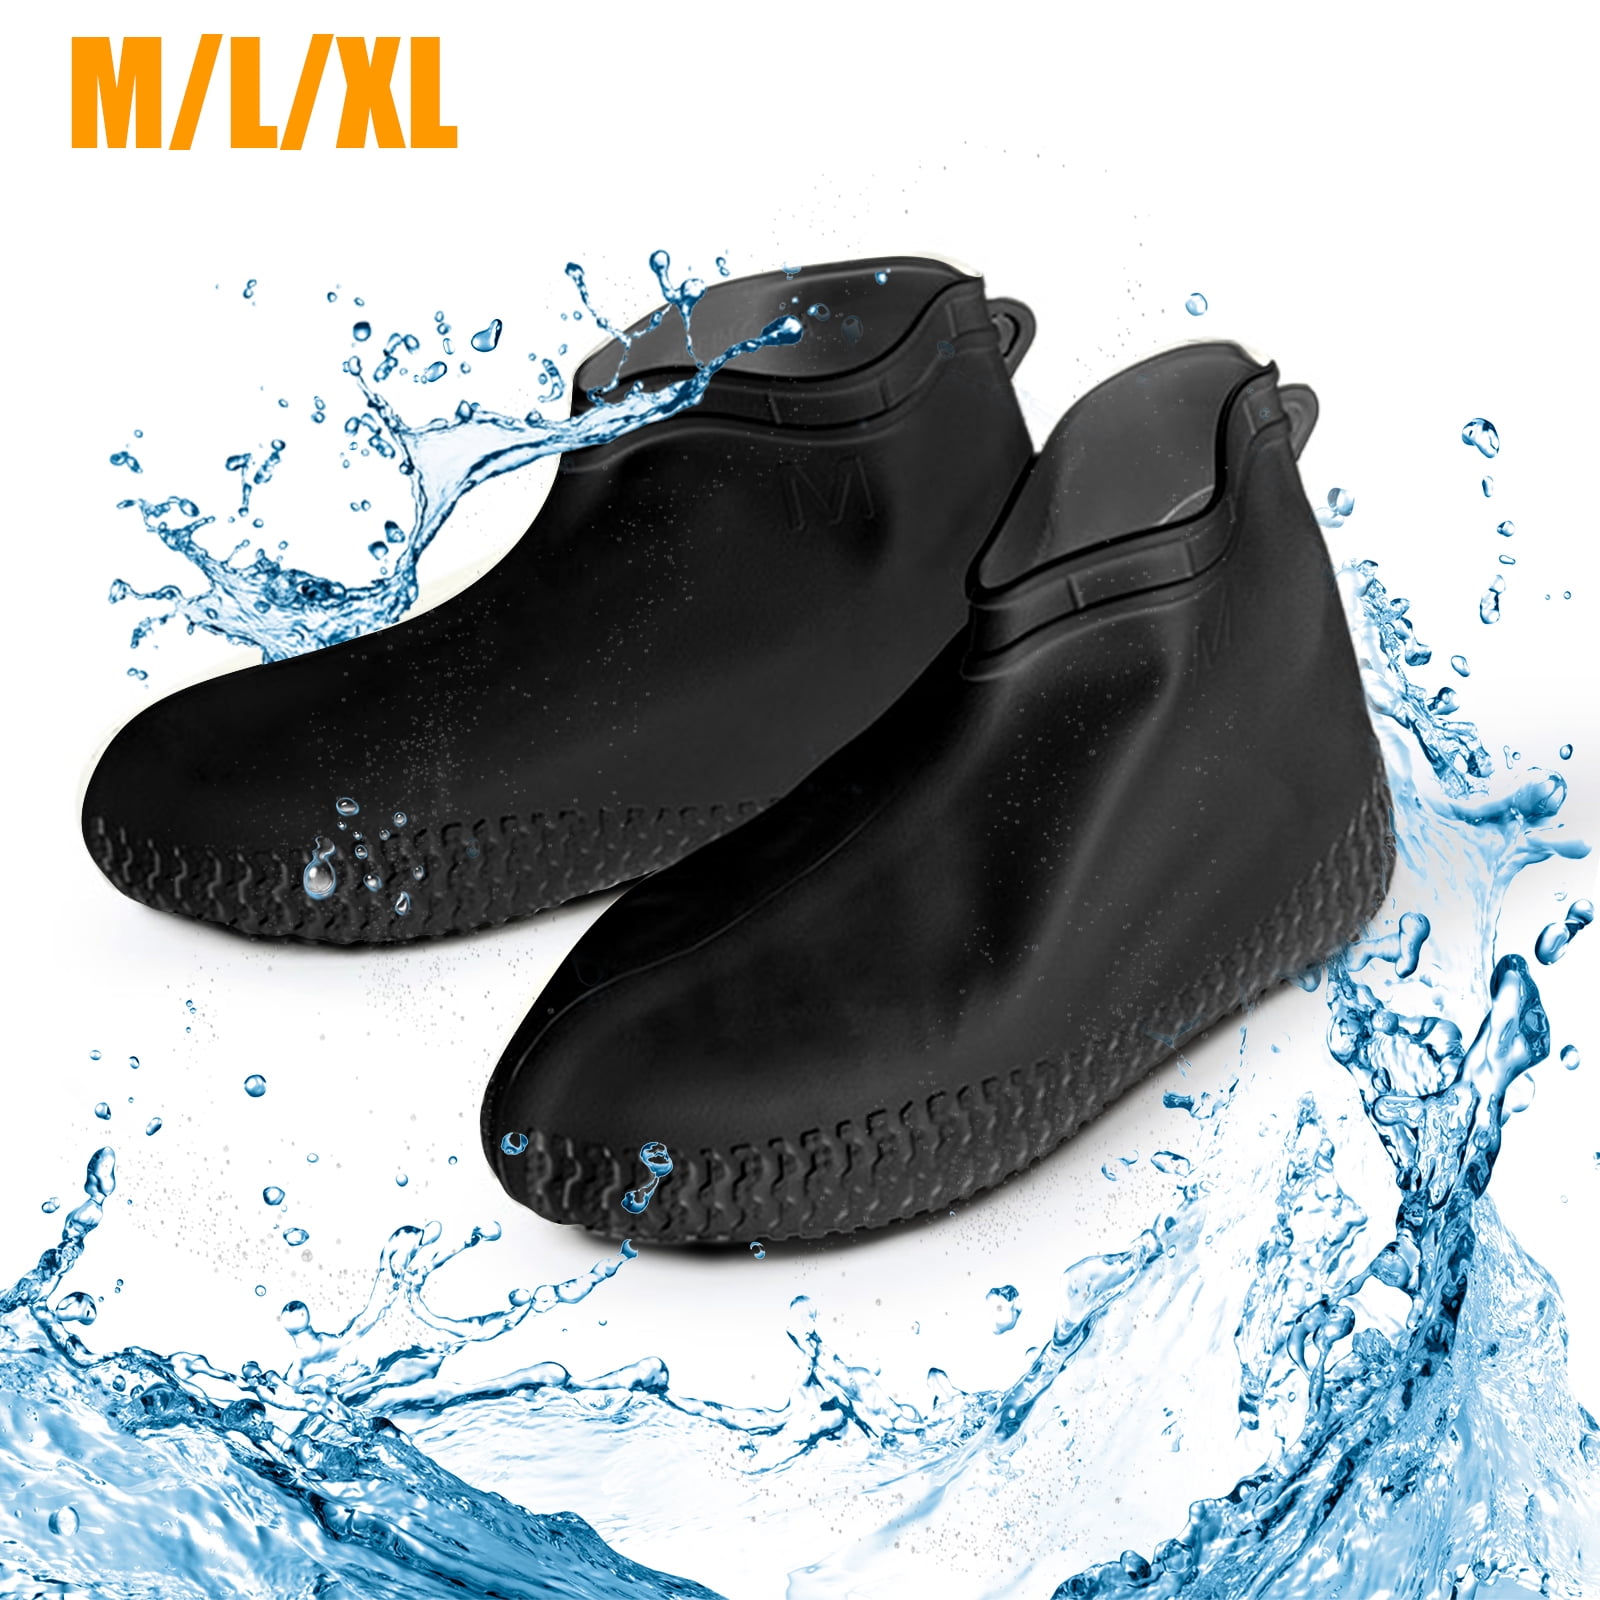 Candyly Shoe Cover,Reusable Rain Gear Boots Snow Shoe Covers Waterproof Shoes Overshoes 